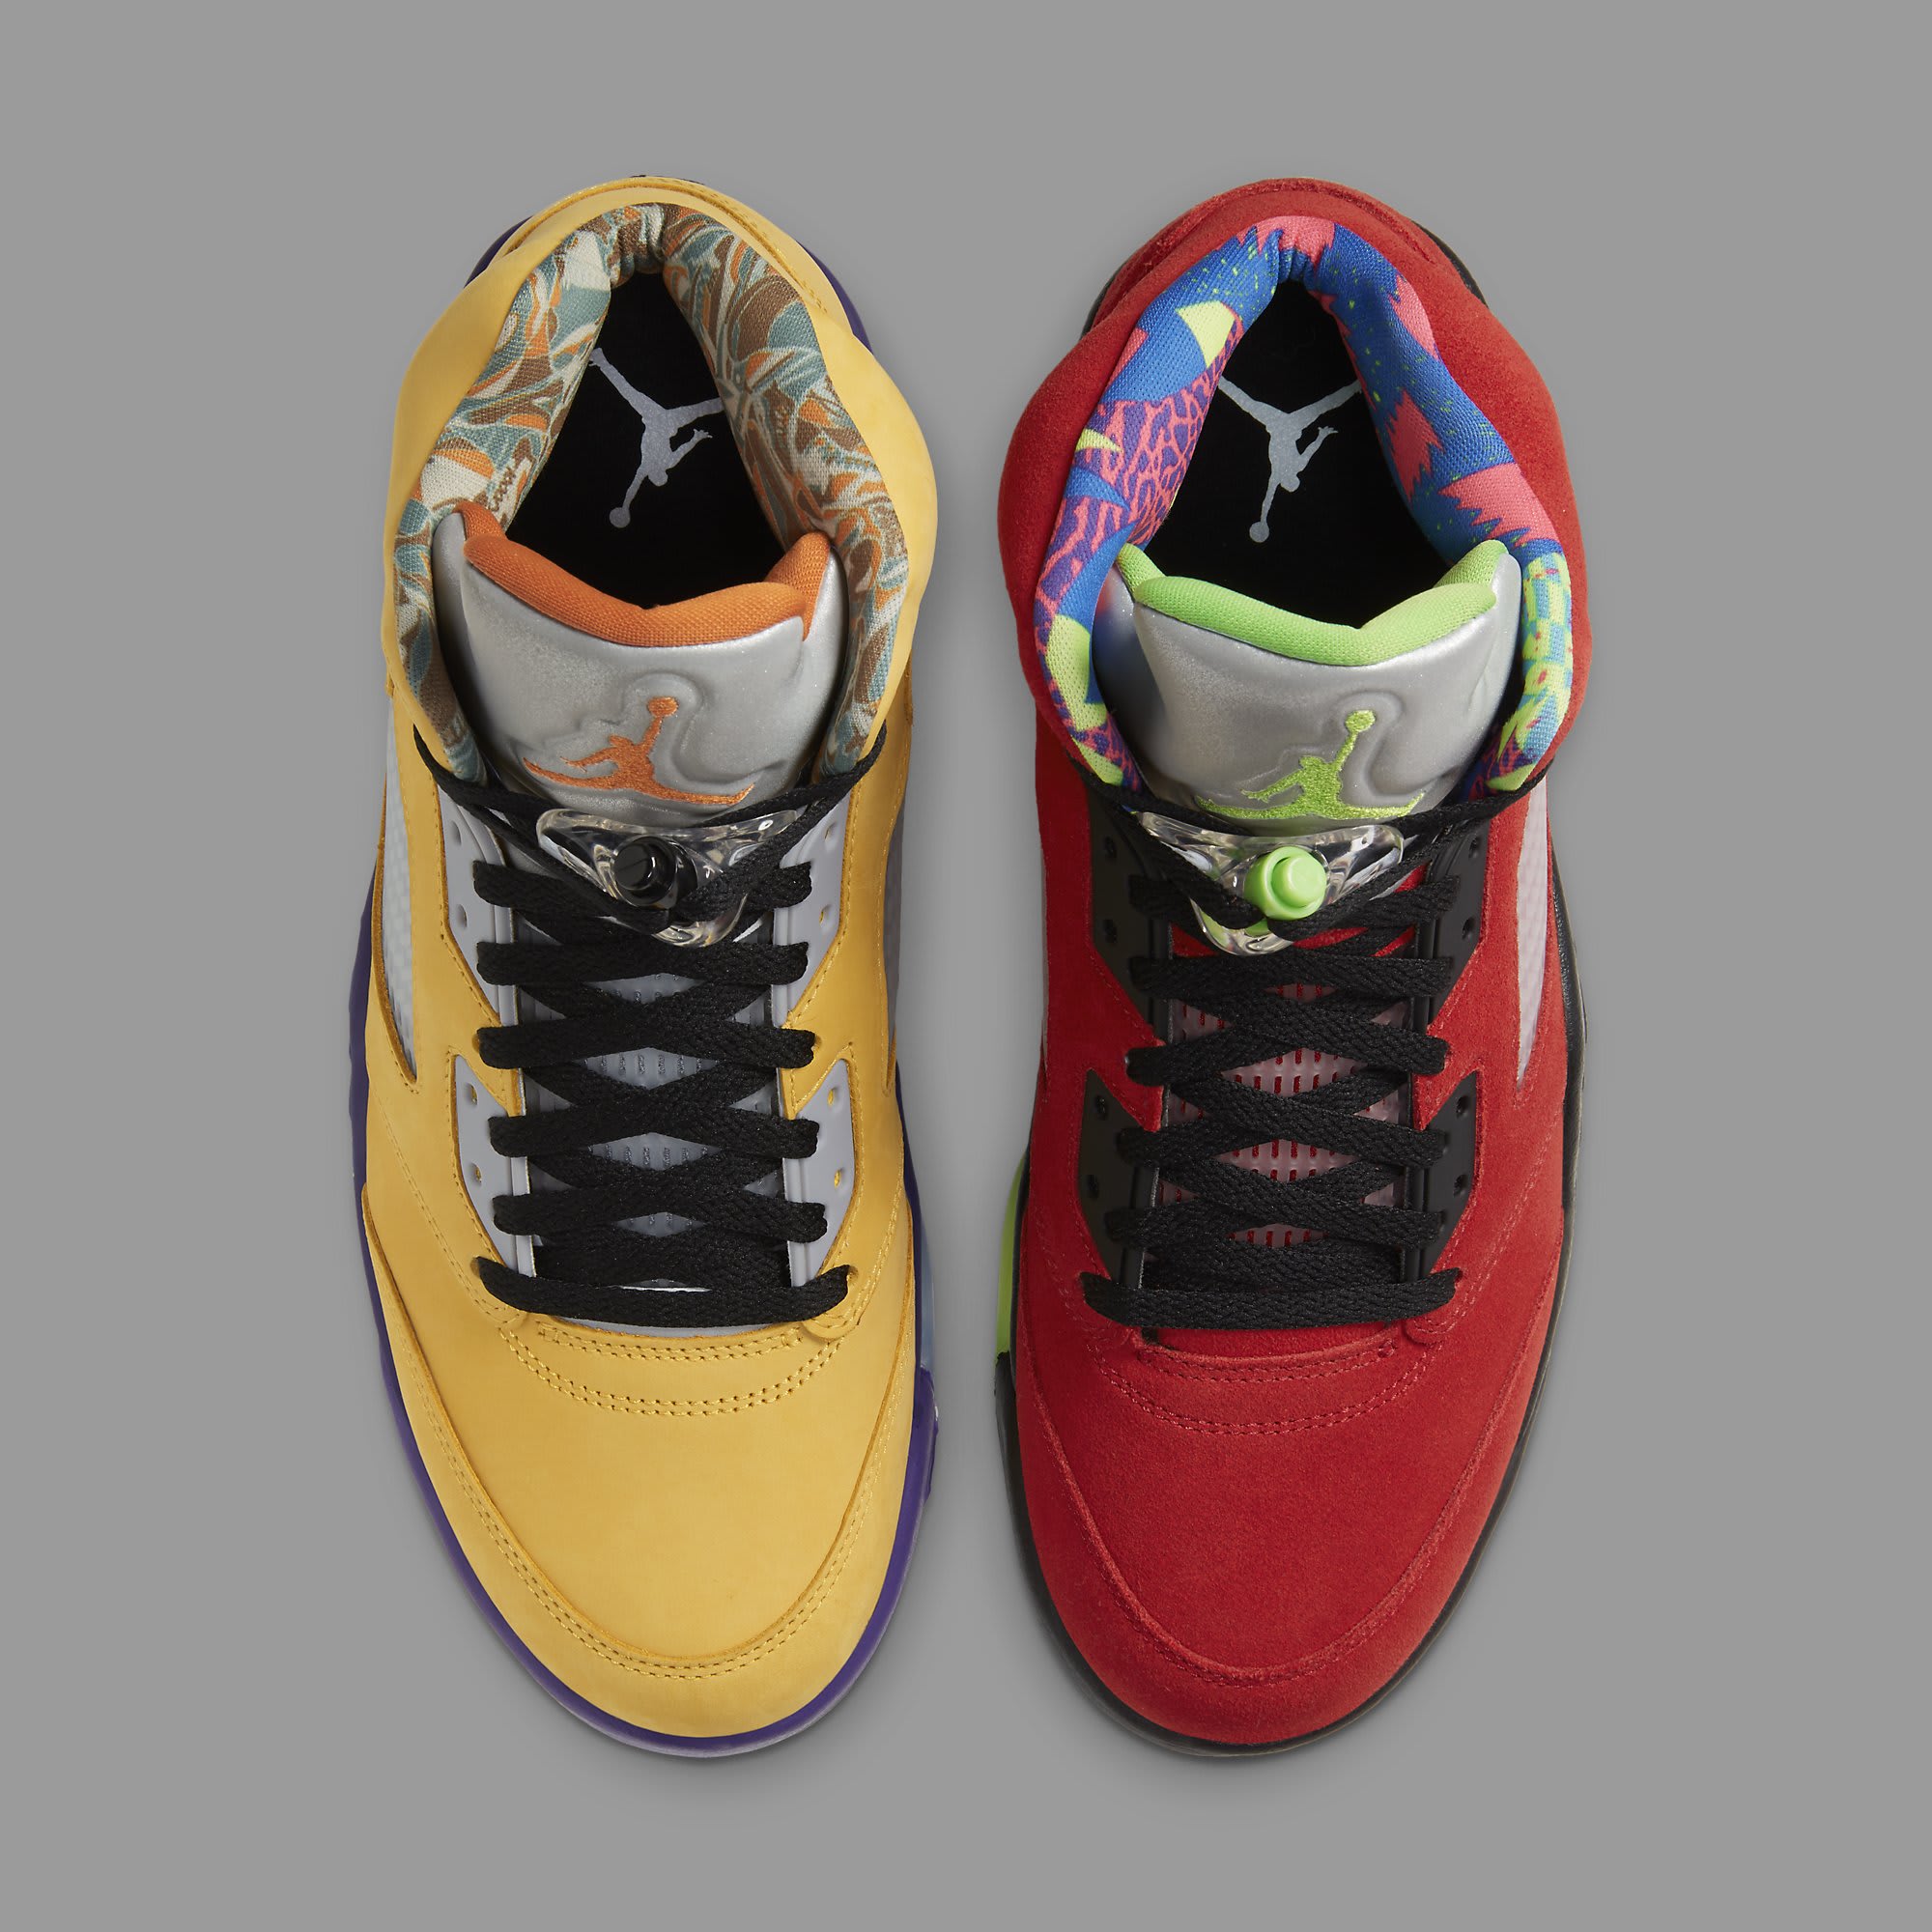 red and yellow jordans